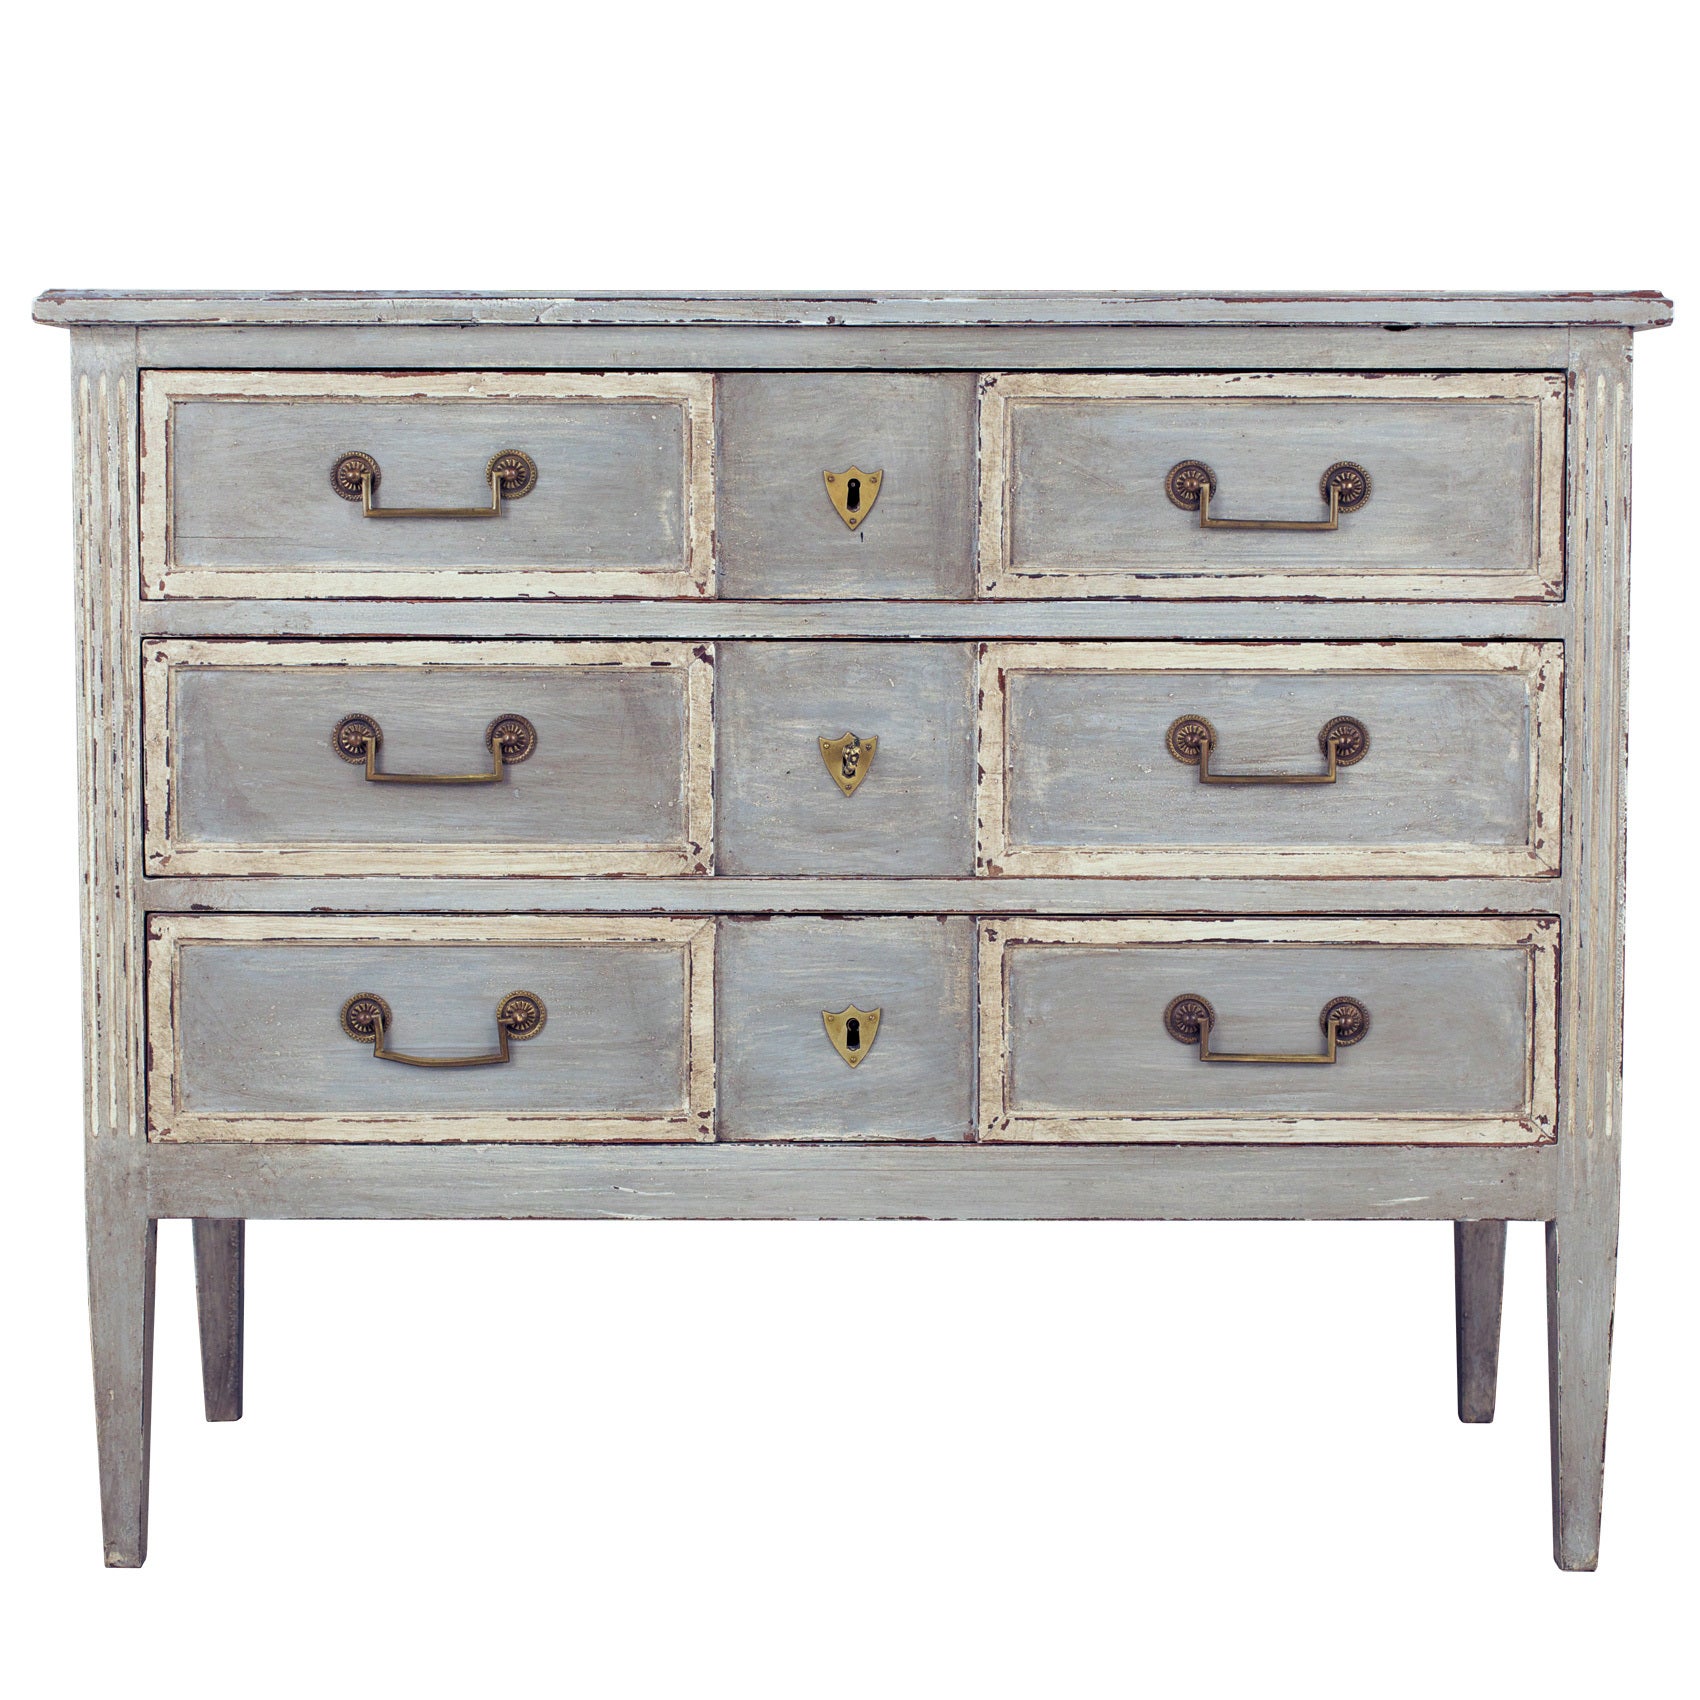 French Directoire Chest of Drawers